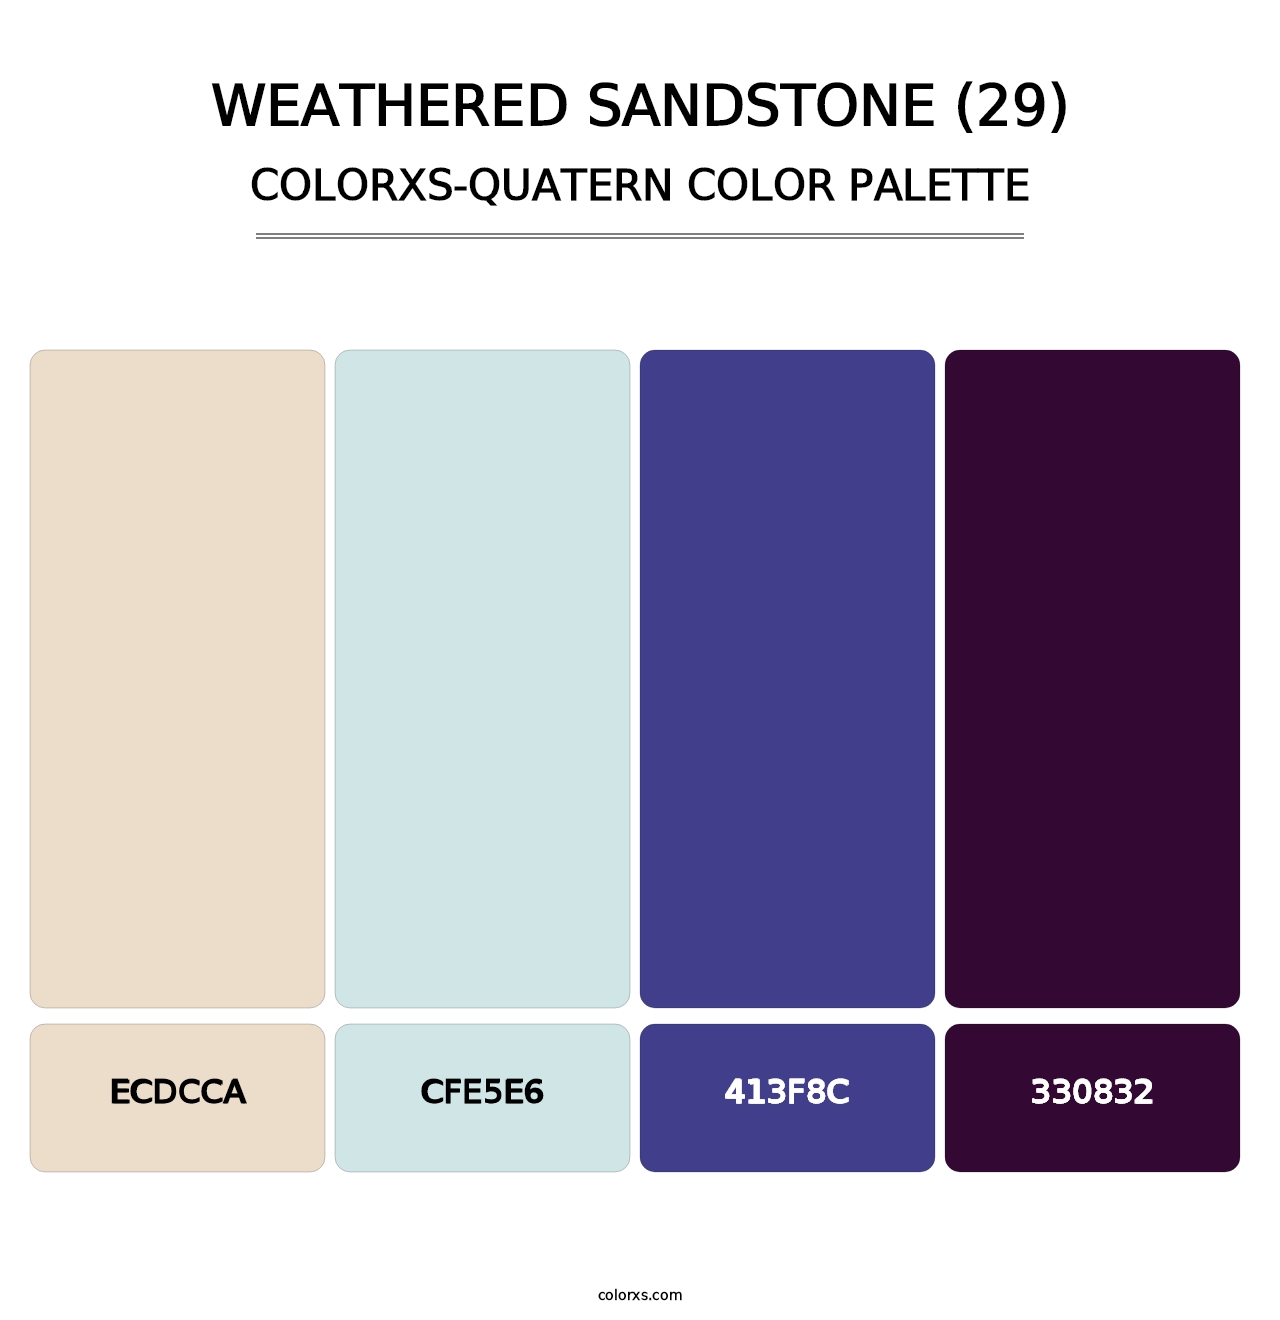 Weathered Sandstone (29) - Colorxs Quatern Palette